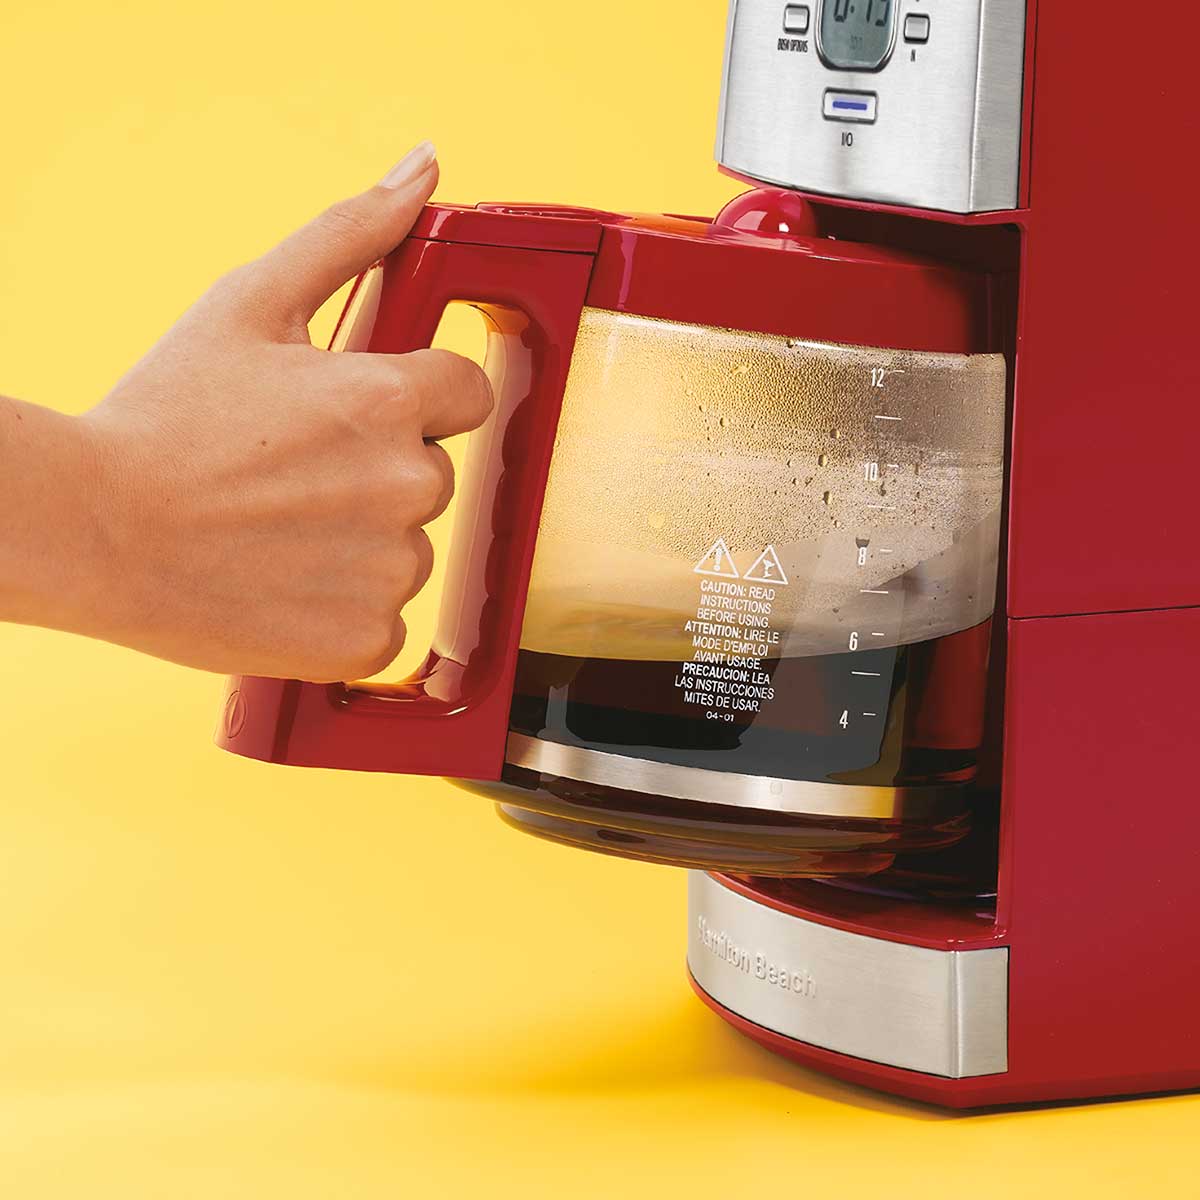 12-Cup Programmable Coffee Maker, Red - 43253R